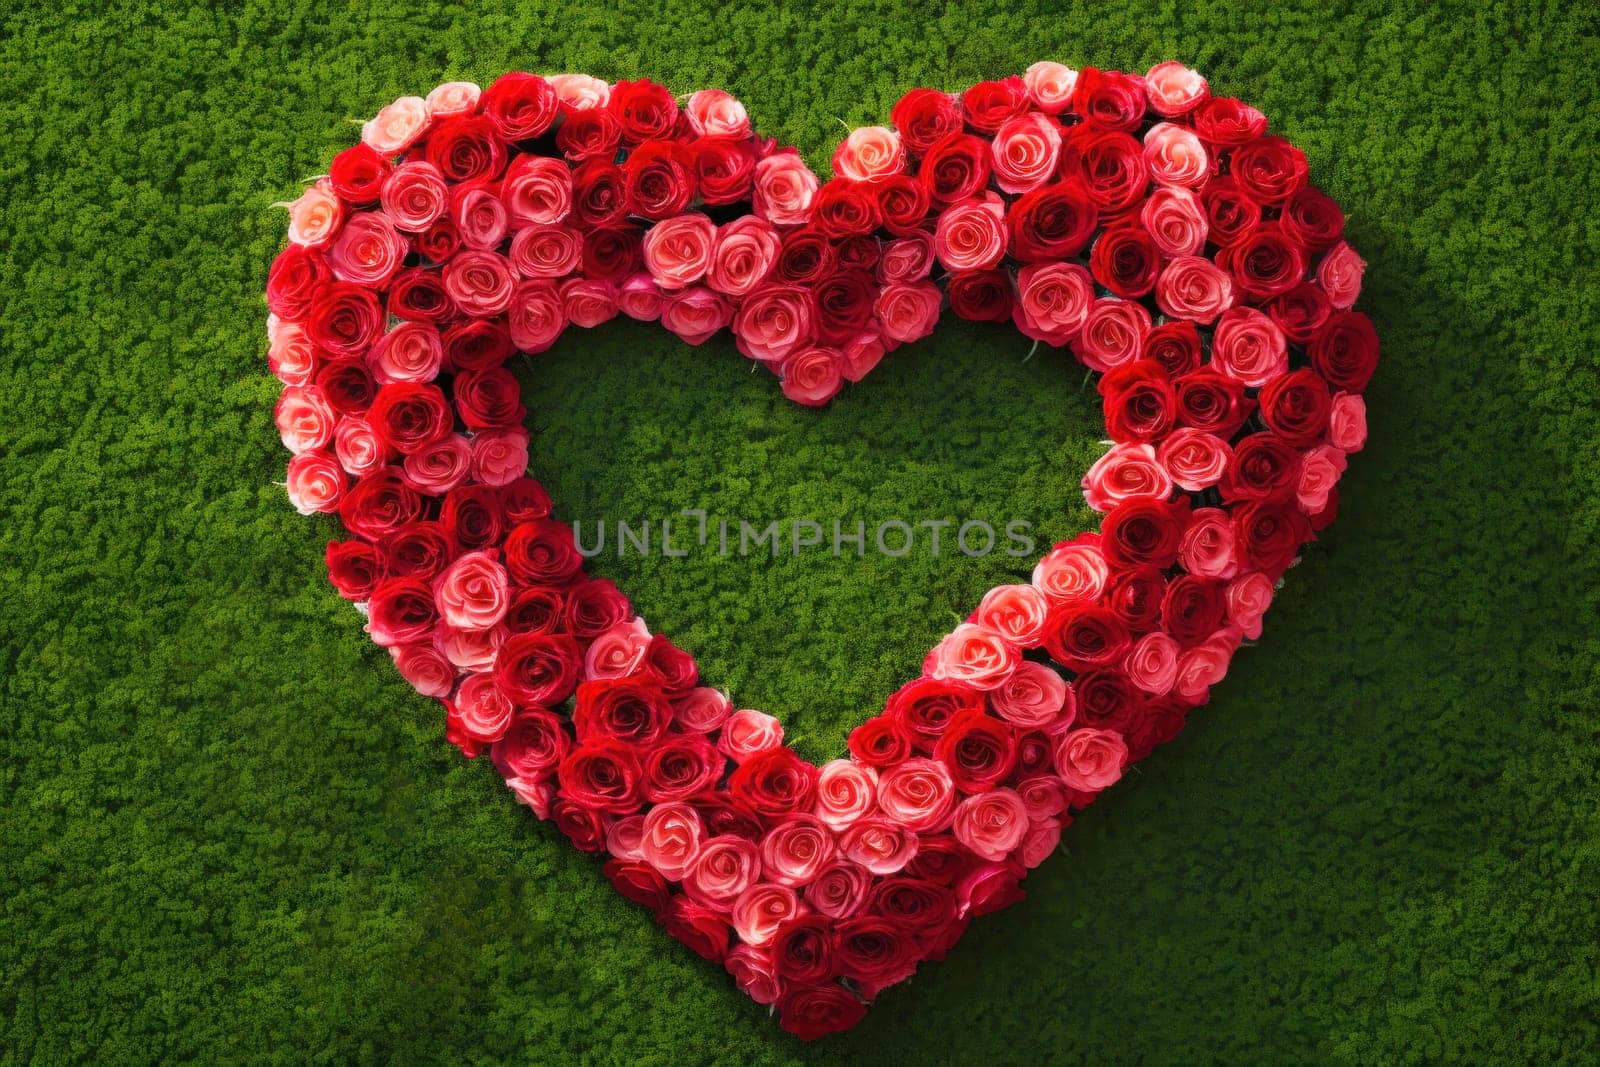 Rose flowers arranged in heart shape on a green background by andreyz